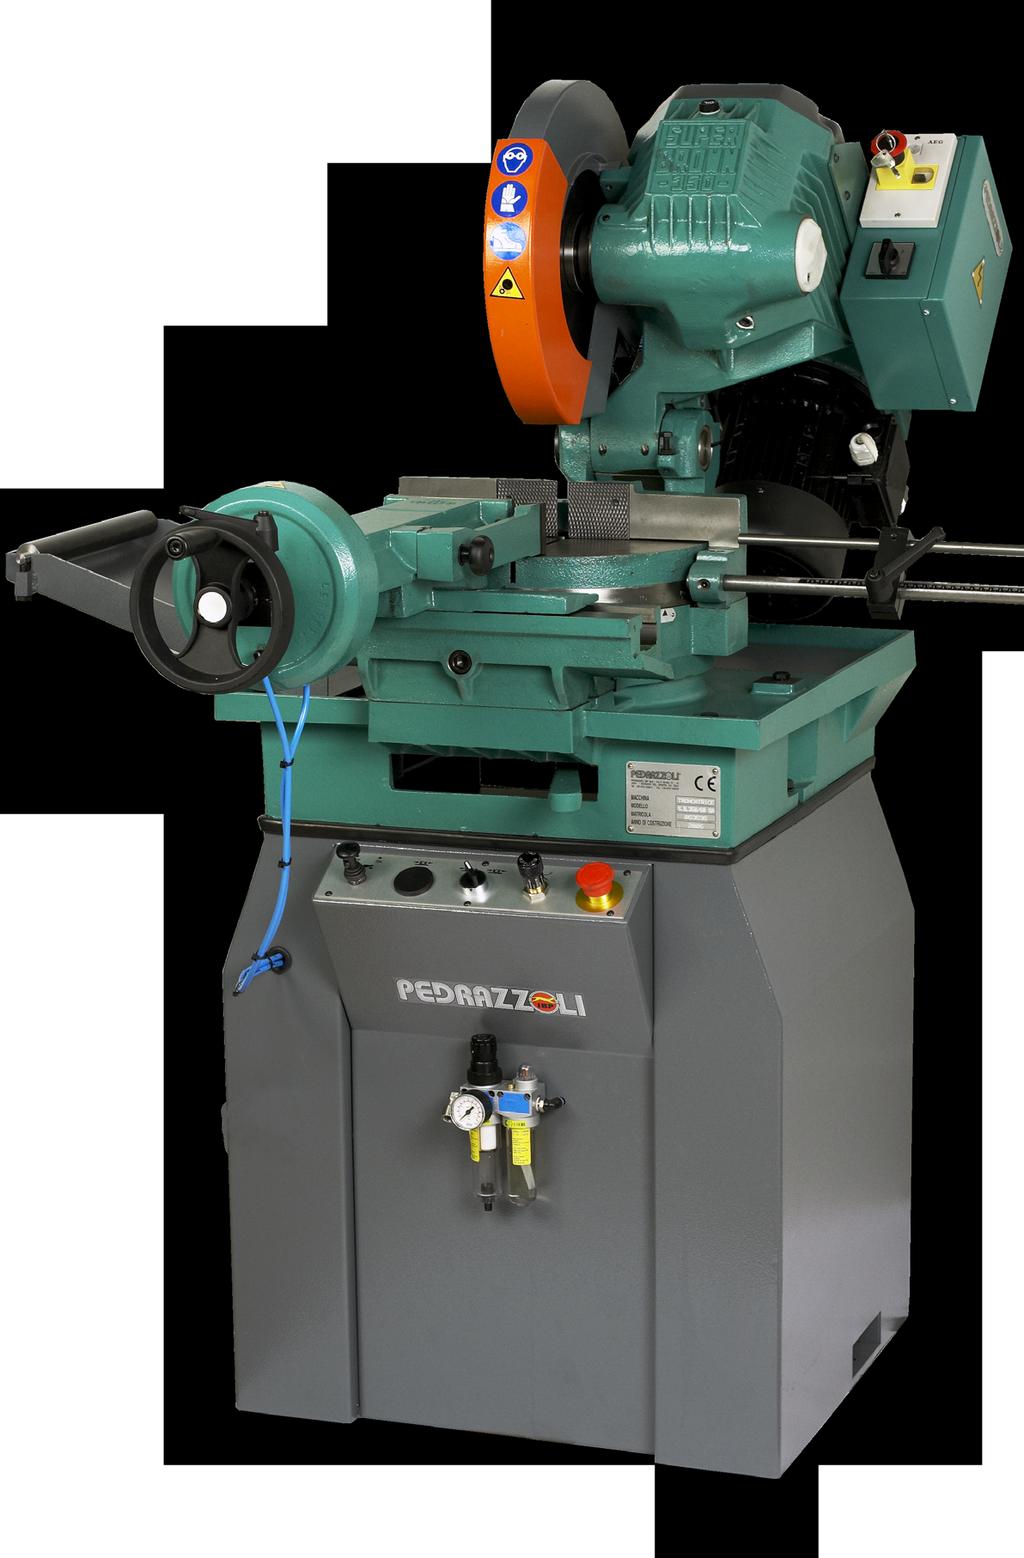 SUPER BROWN 350 SA SEMIAUTOMATIC CIRCULAR SAW with infinitely variable blade speed to cut all types of metals SUPER BROWN 350/45 SA for cuts from 0 to 45 right SUPER BROWN 350/60 SA for cuts from 60